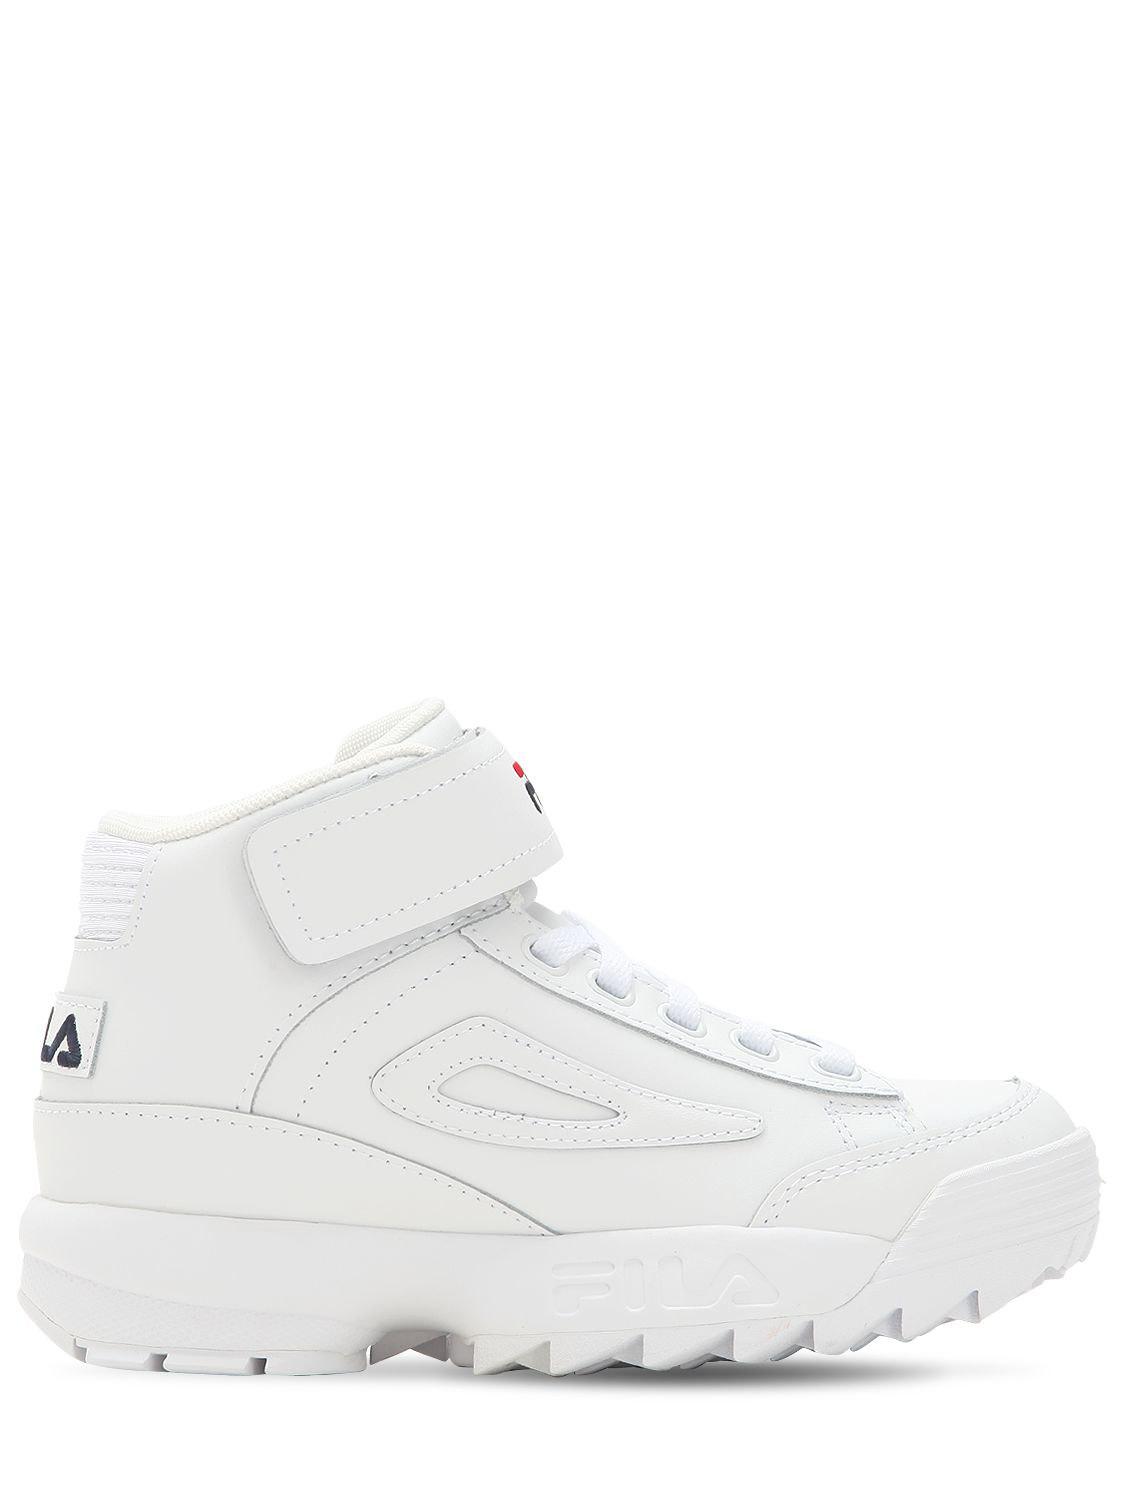 Lyst - Fila Disruptor Leather Platform Sneakers in White - Save 10. ...